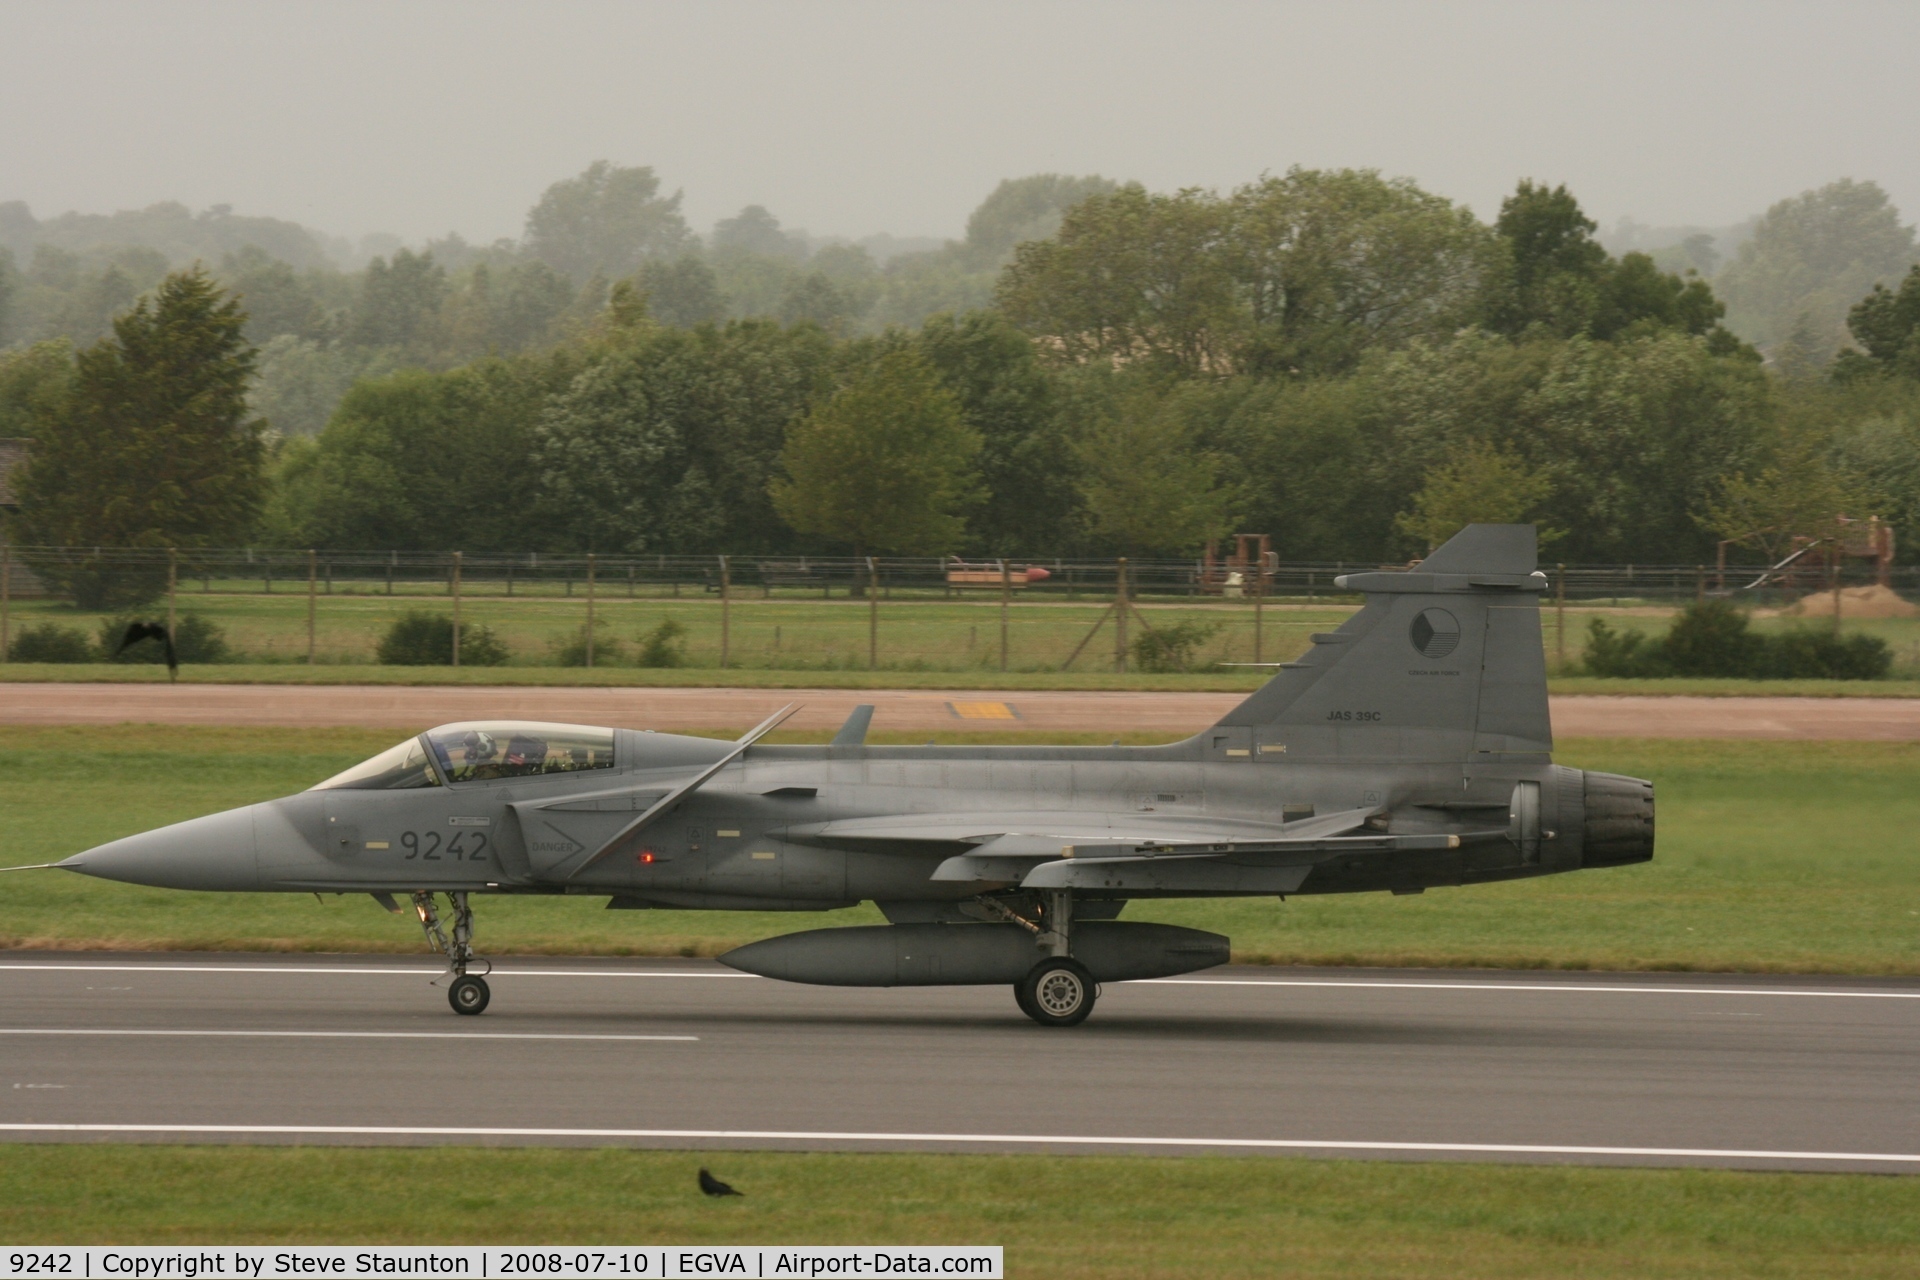 9242, Saab JAS-39C Gripen C/N 39242, Taken at the Royal International Air Tattoo 2008 during arrivals and departures (show days cancelled due to bad weather)